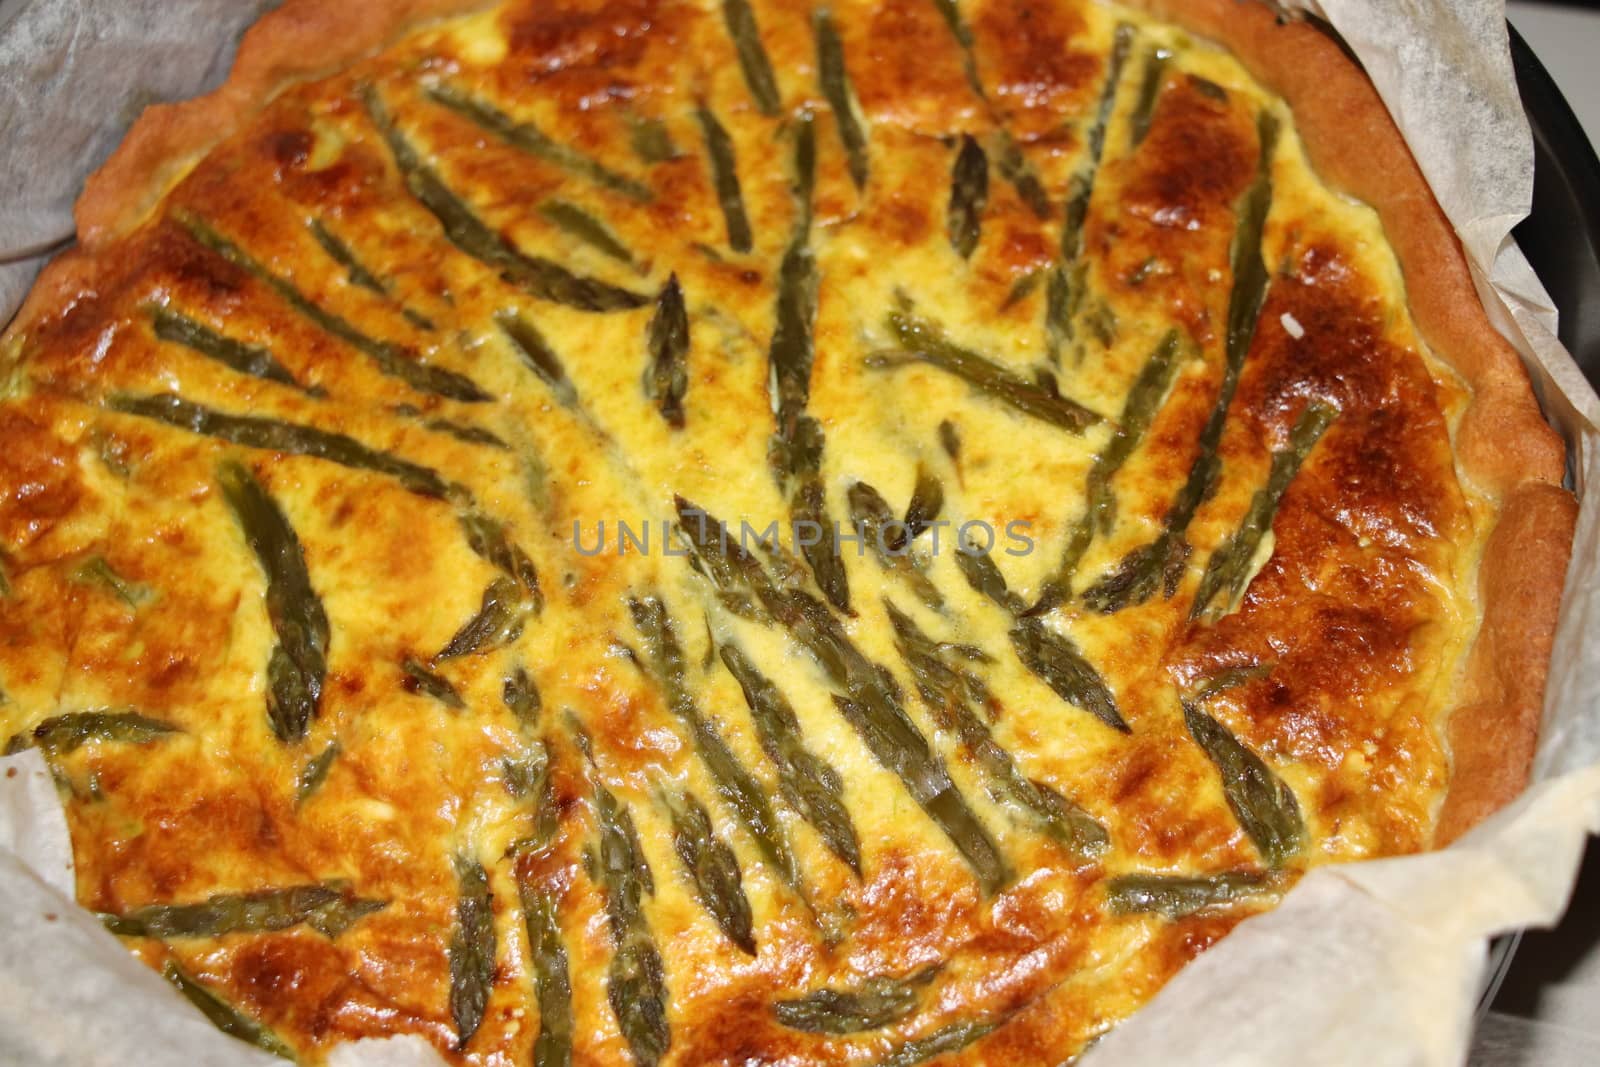 Asparagus tart pastry by marcobir